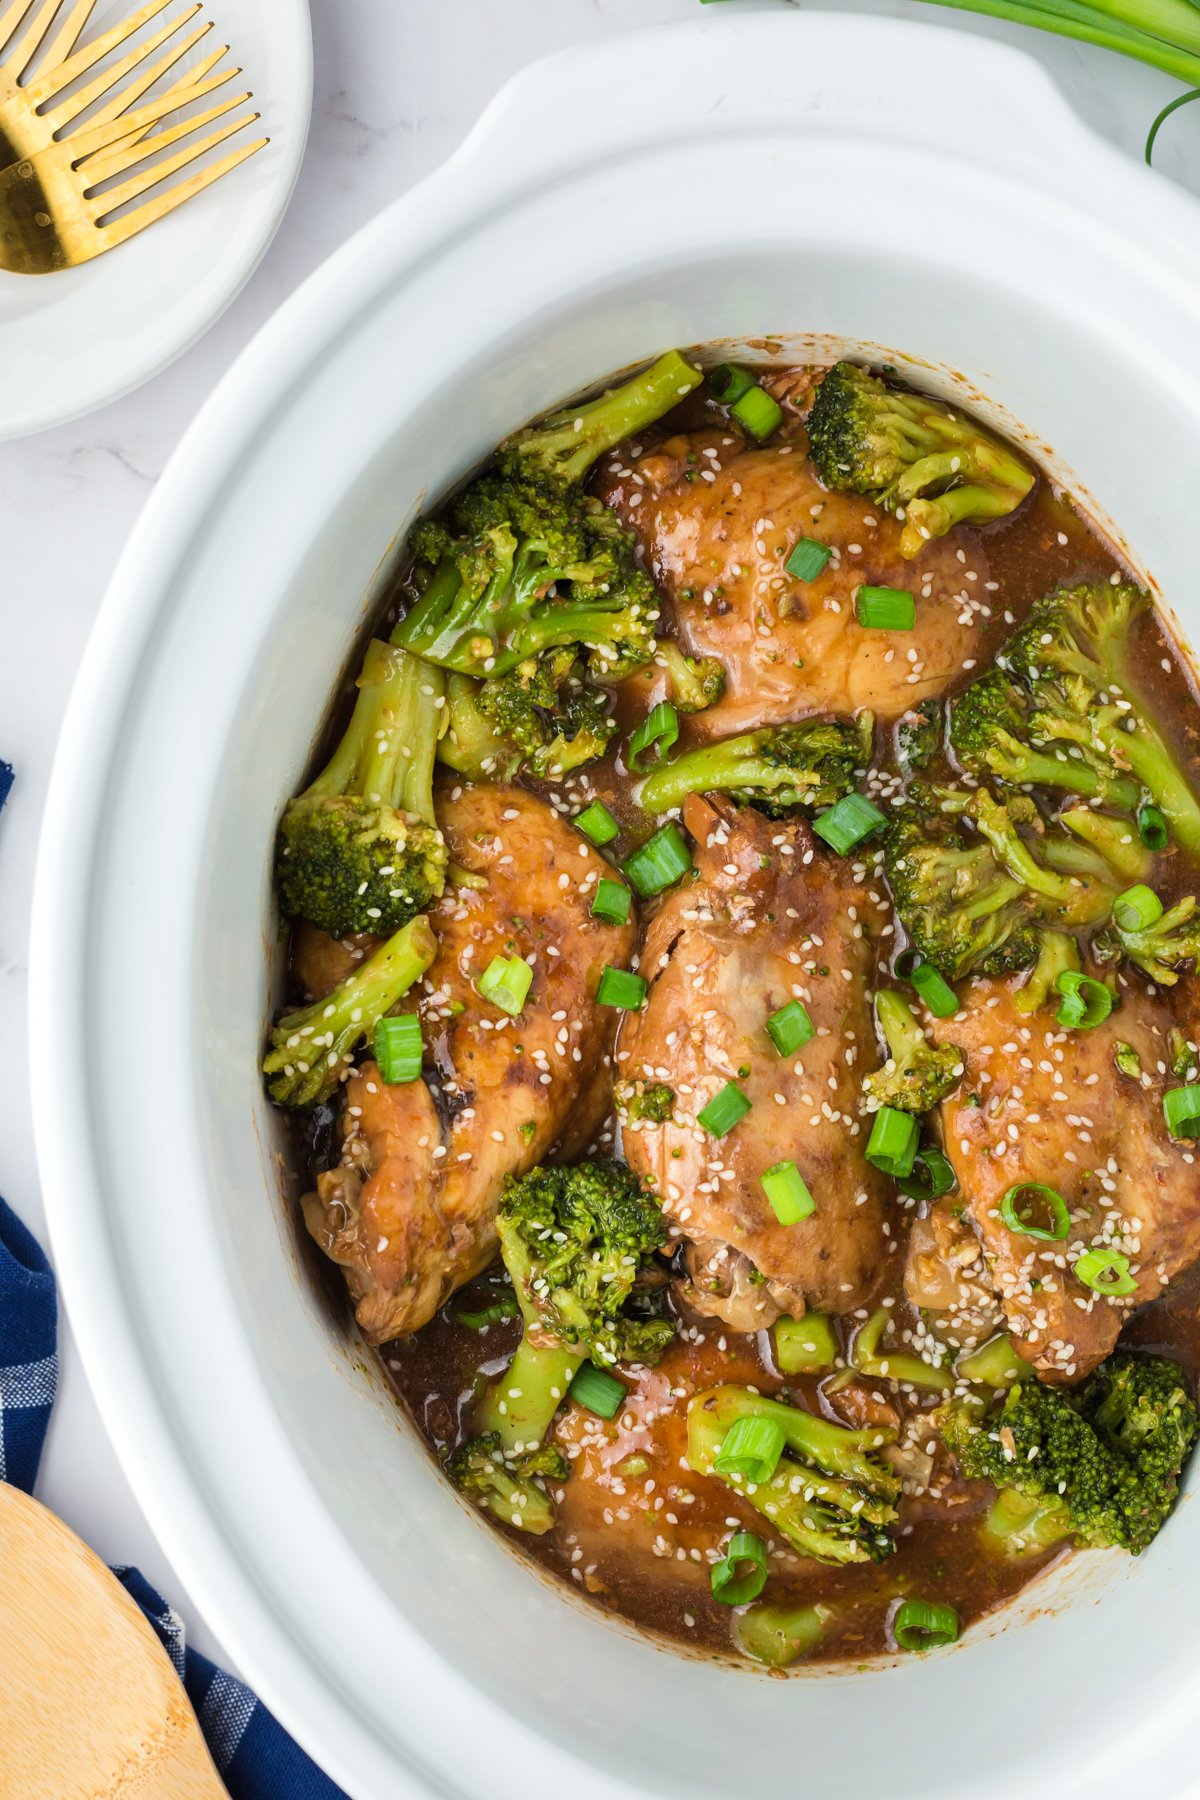 Chicken thighs and broccoli in a slow cooker.